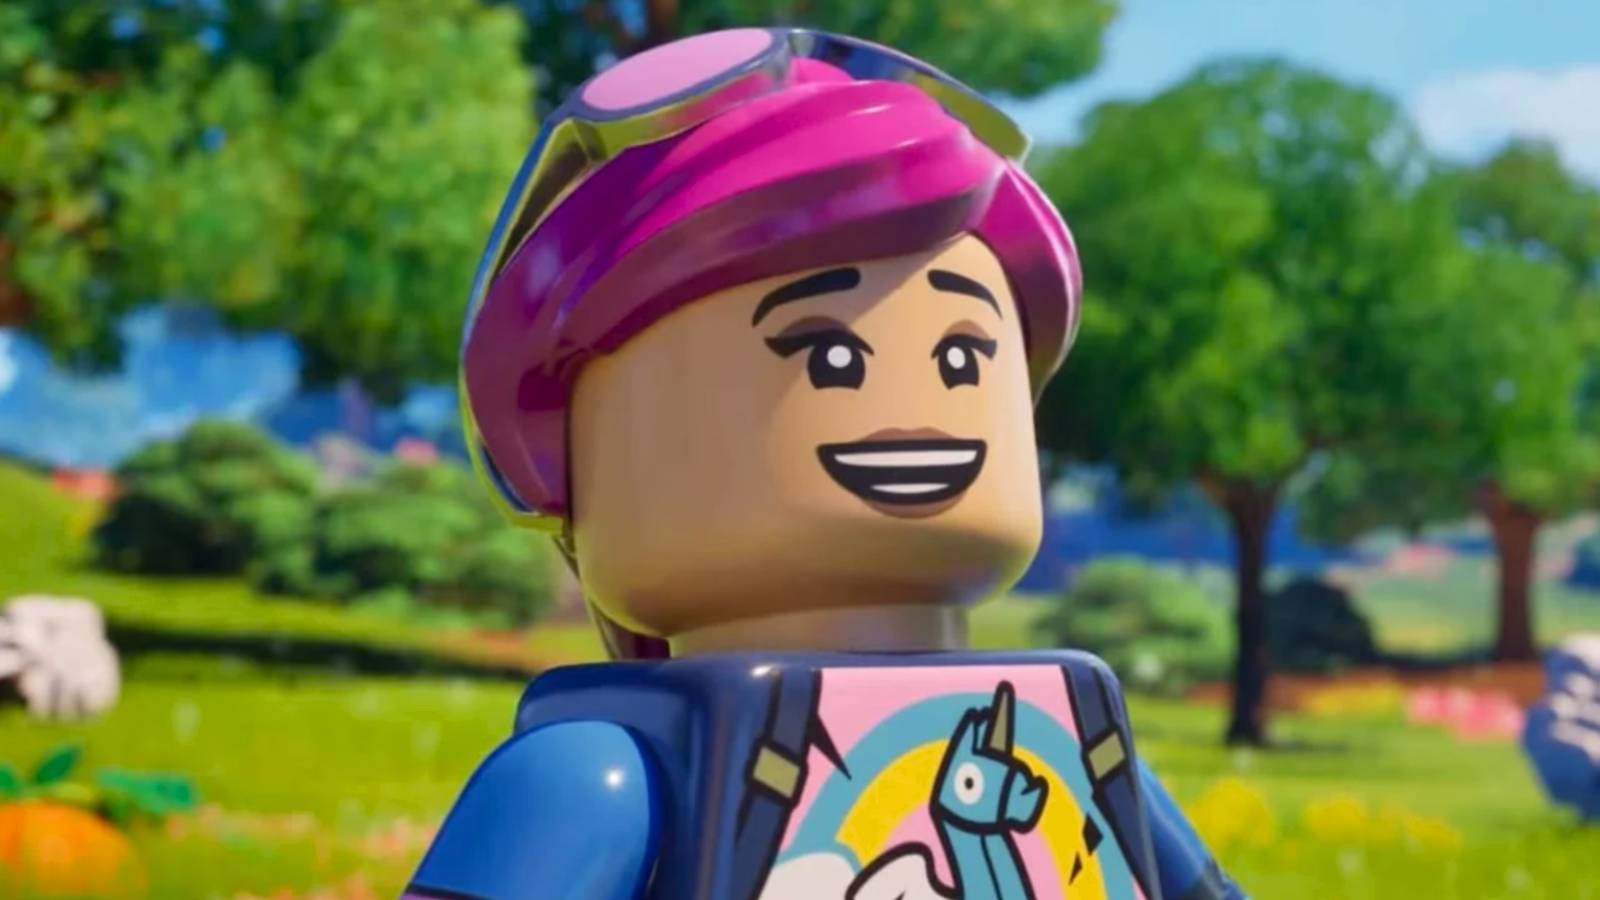 Roblox' Toys Recreate The Online Fun Enjoyed By 44 Million Players